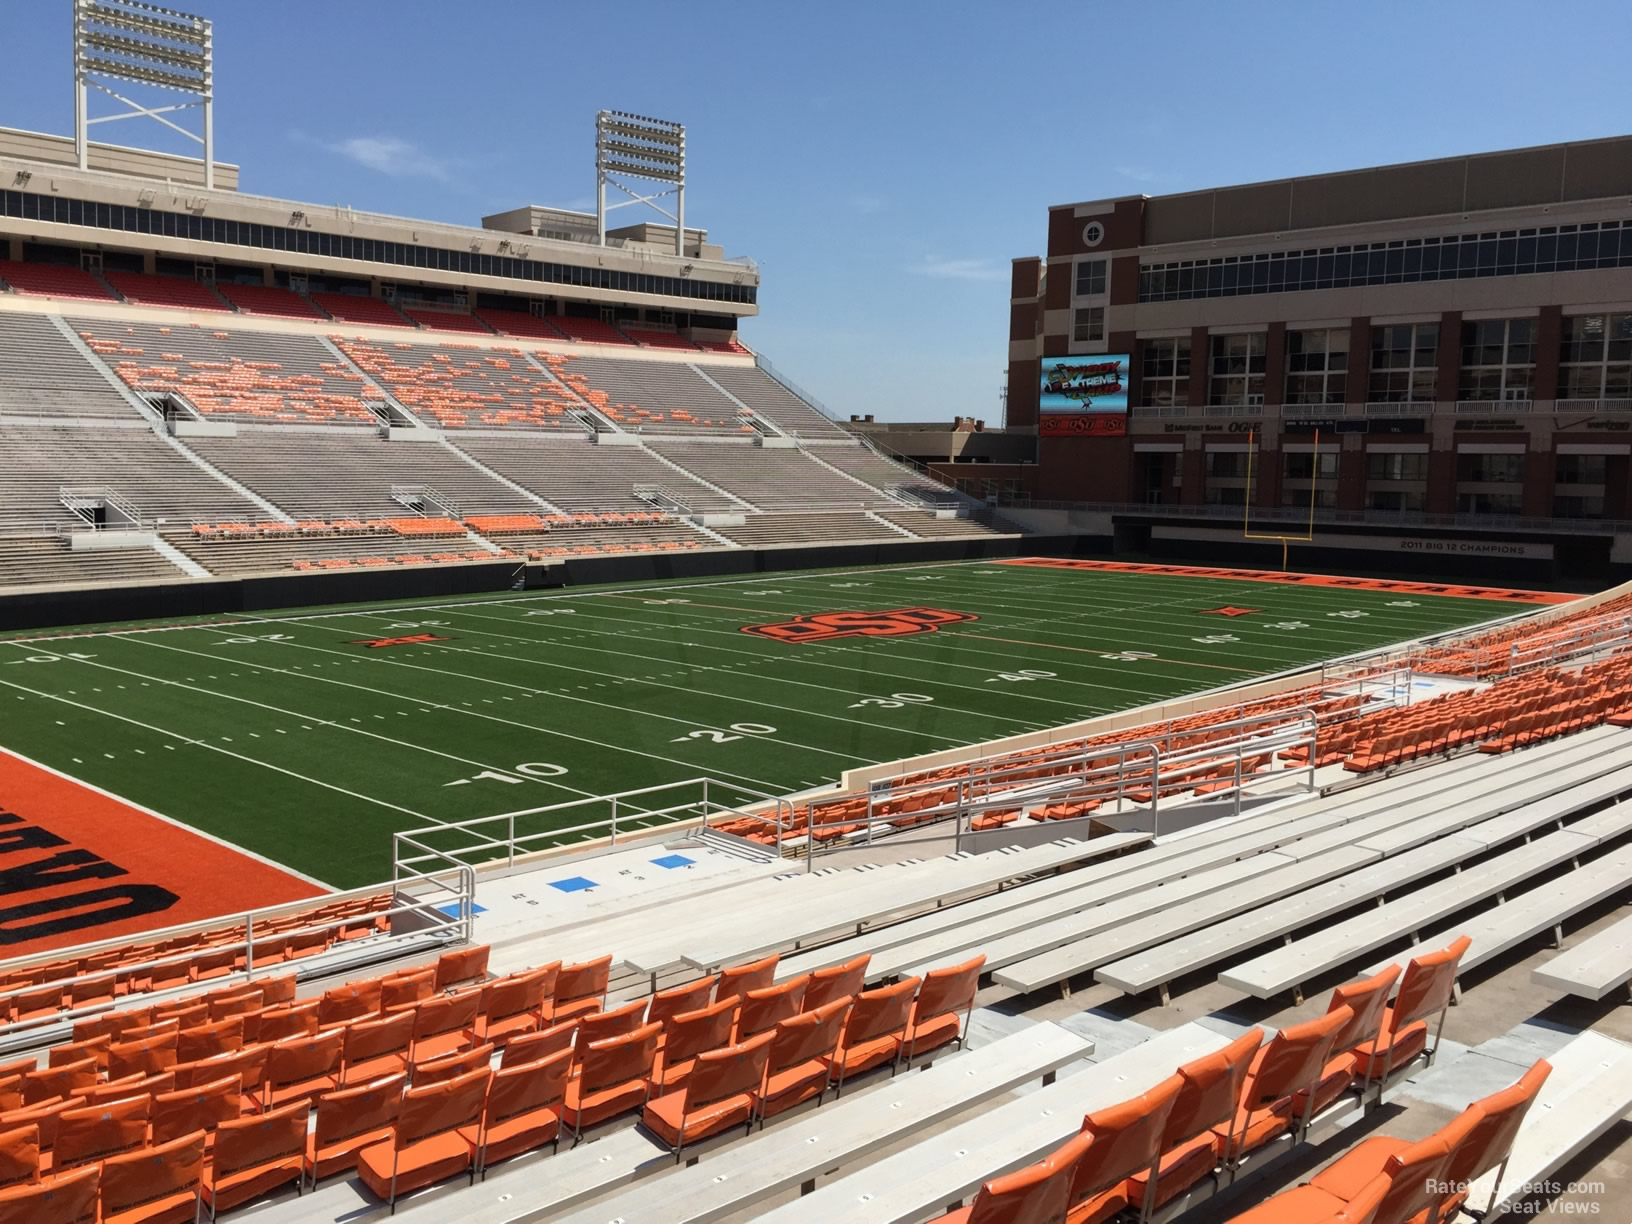 section 210, row 20 seat view  - boone pickens stadium